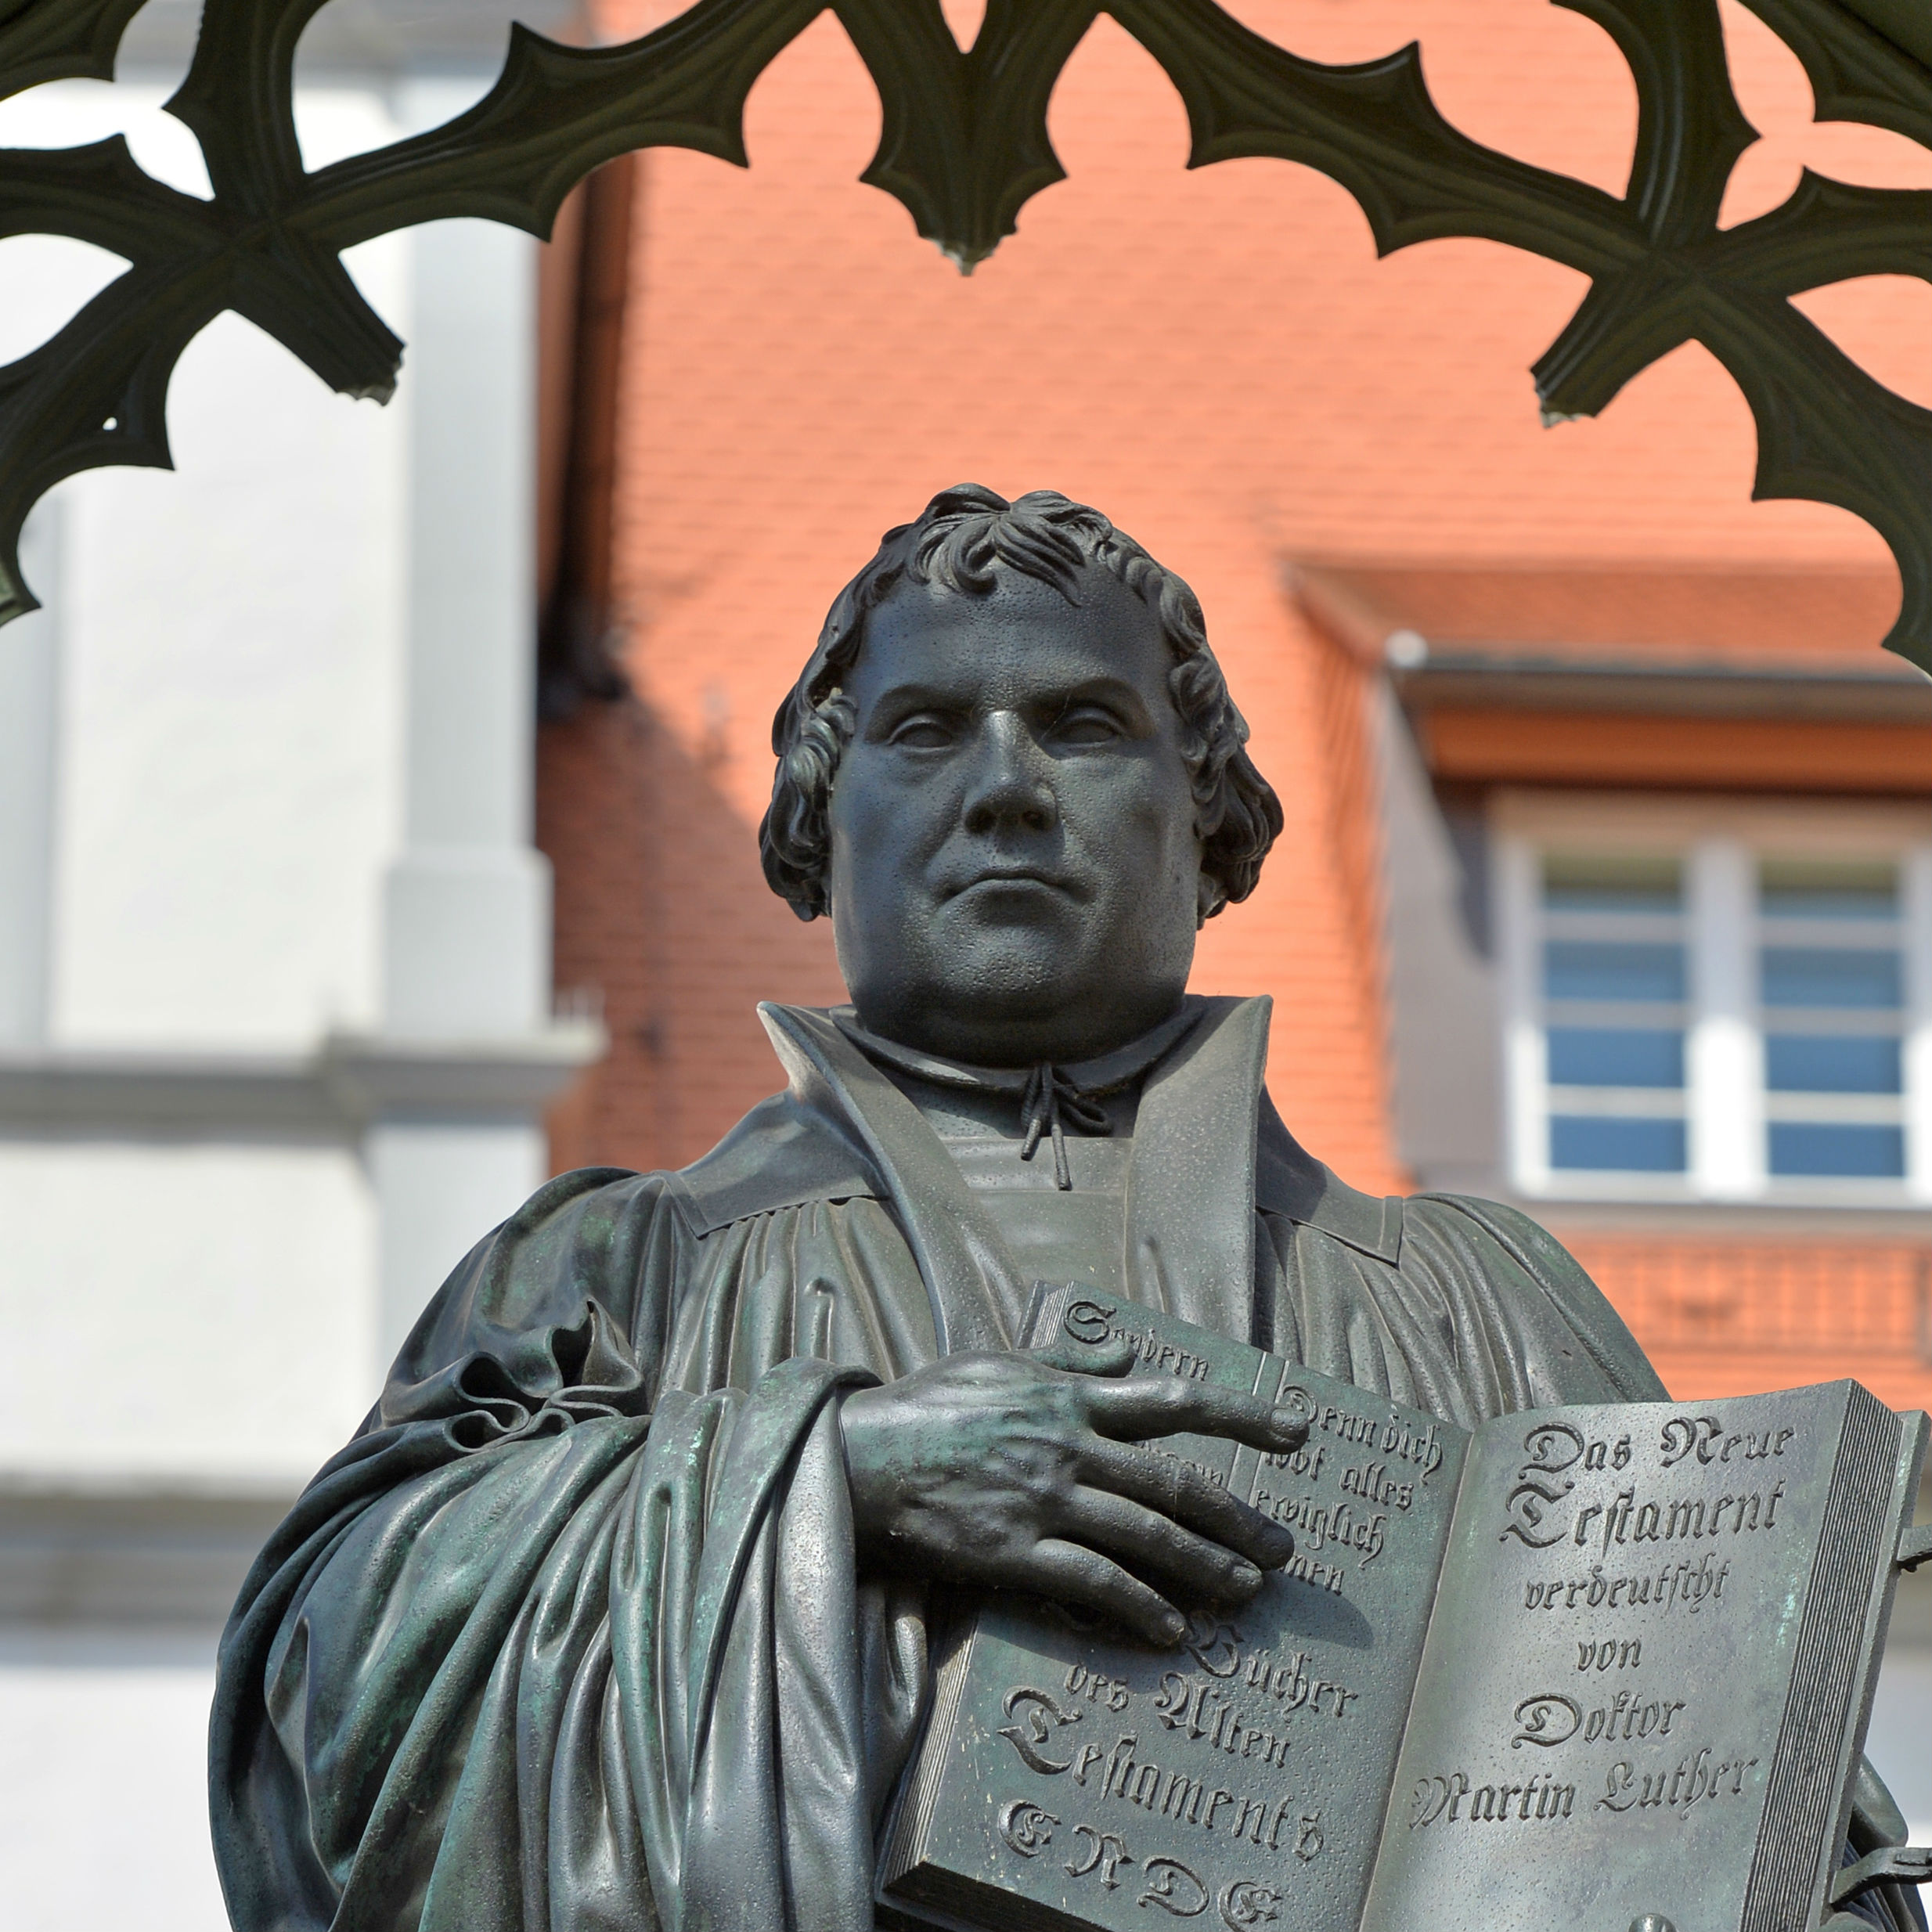 Pope to lead common prayer service at Reformation commemoration in Sweden